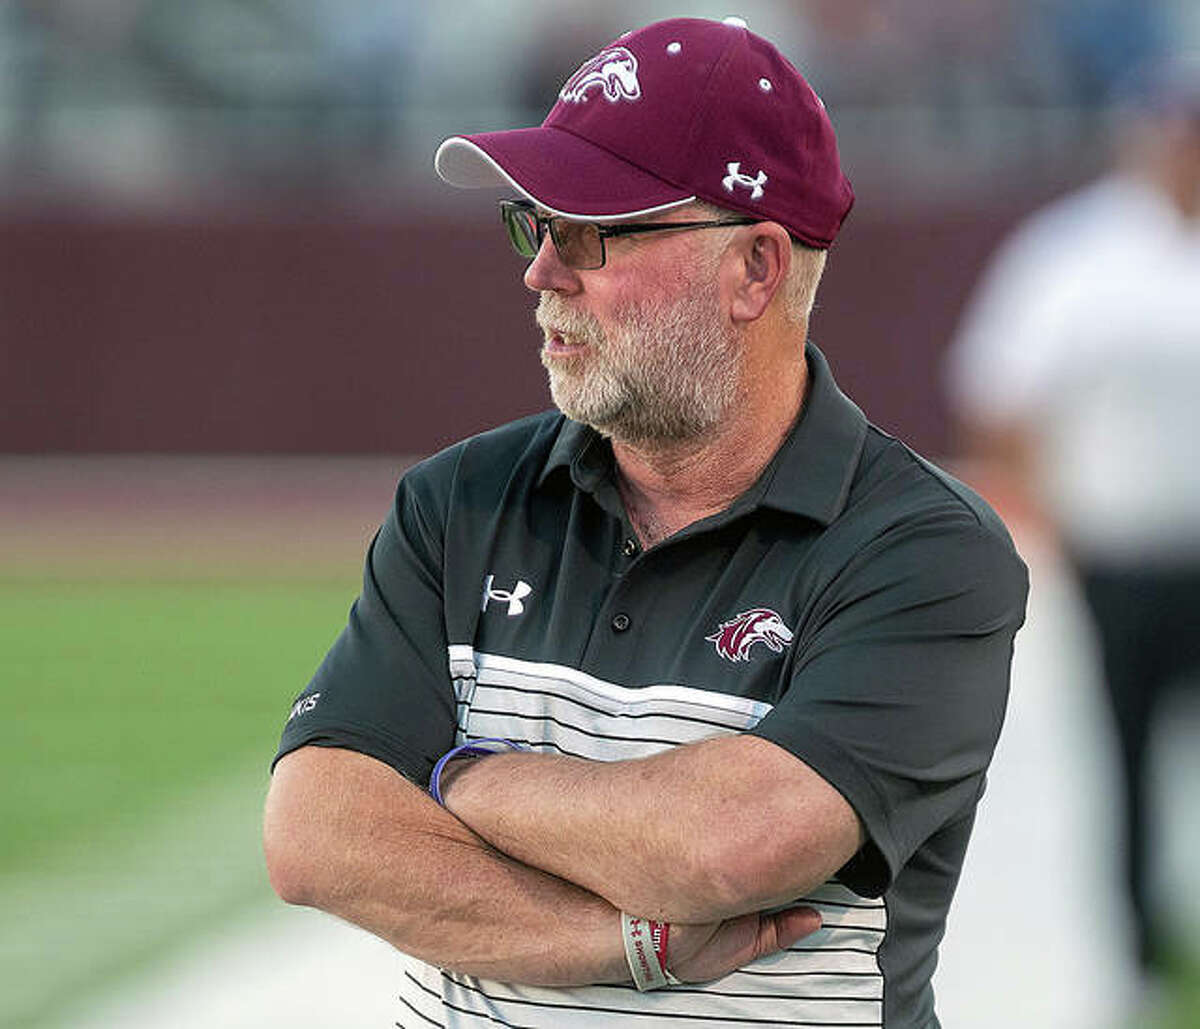 Jerry Kill has stepped down as athletic director at SIU Carbondale. The former head football coach at SIUC, who went on to coach at Northern Illinois University at the University of Minnesota has accepted a position as an assistant football coach at Virginia Tech.